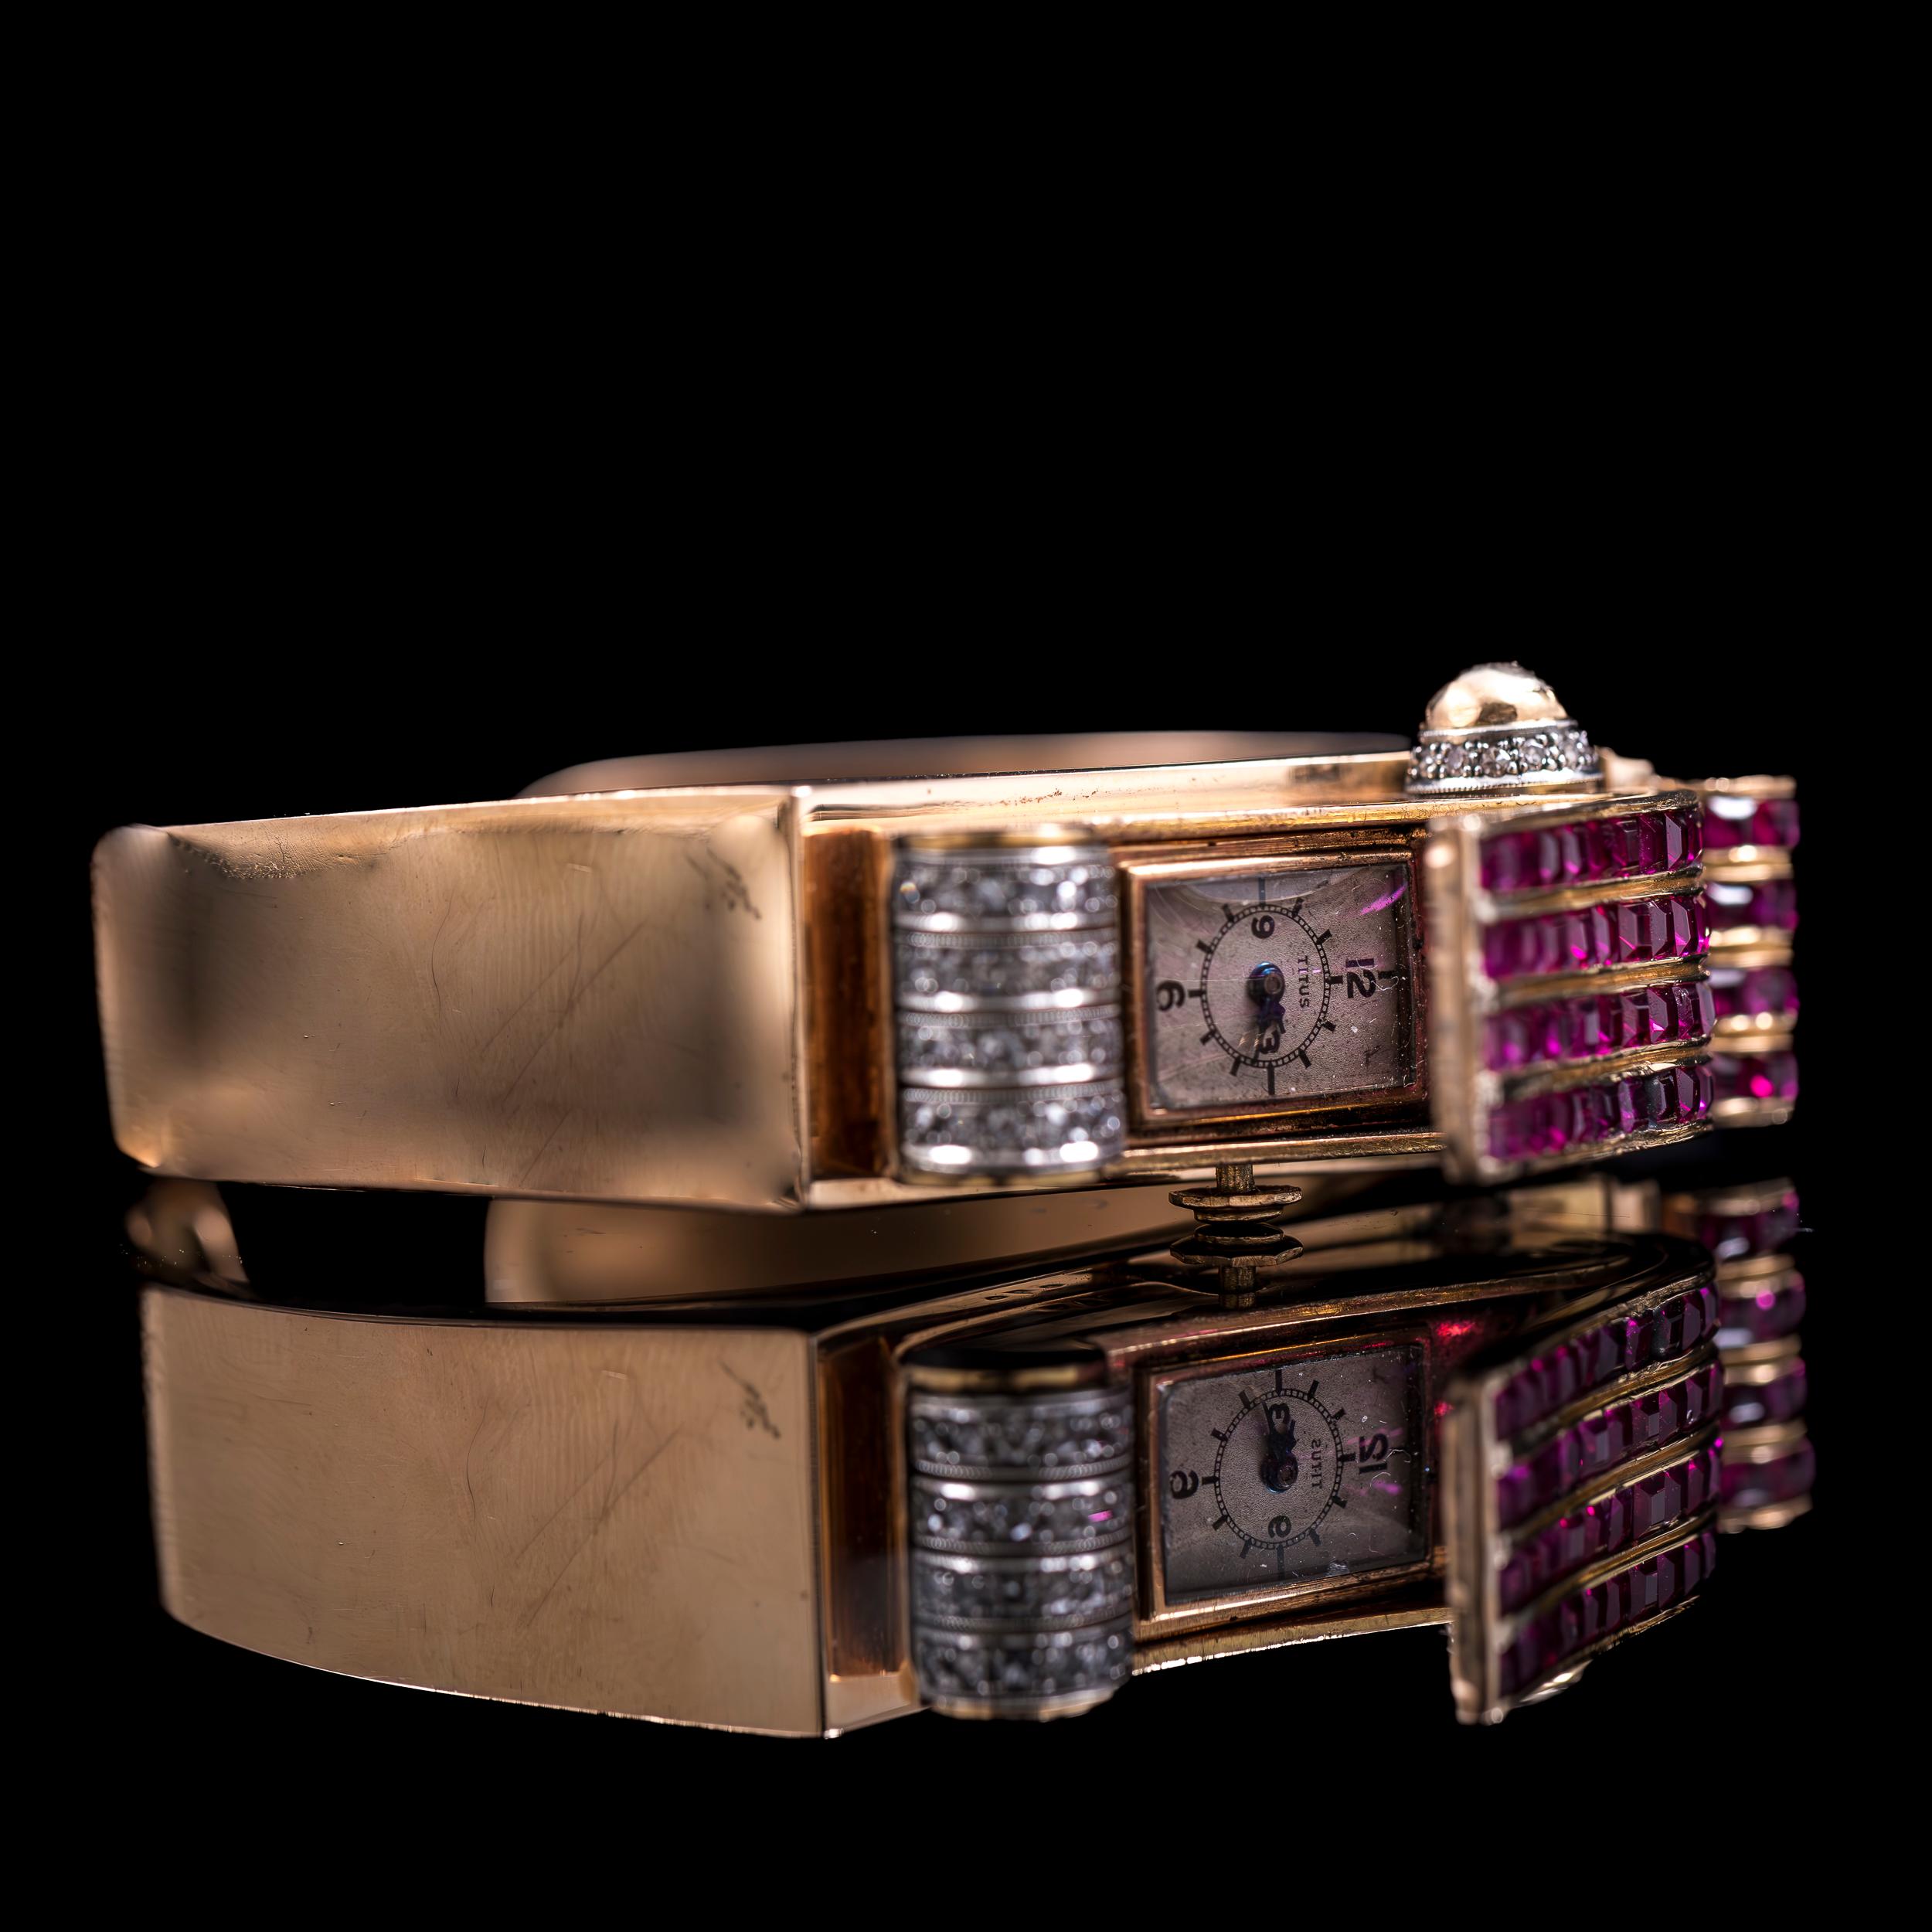 Art Deco diamond and synthetic ruby odeonesque concealed bracelet and cocktail watch in 19.2kt yellow gold and platinum, signed Titus, Portugal, 1940s. This exquisite piece boasts a dual identity, seamlessly merging the allure of fine jewelry with